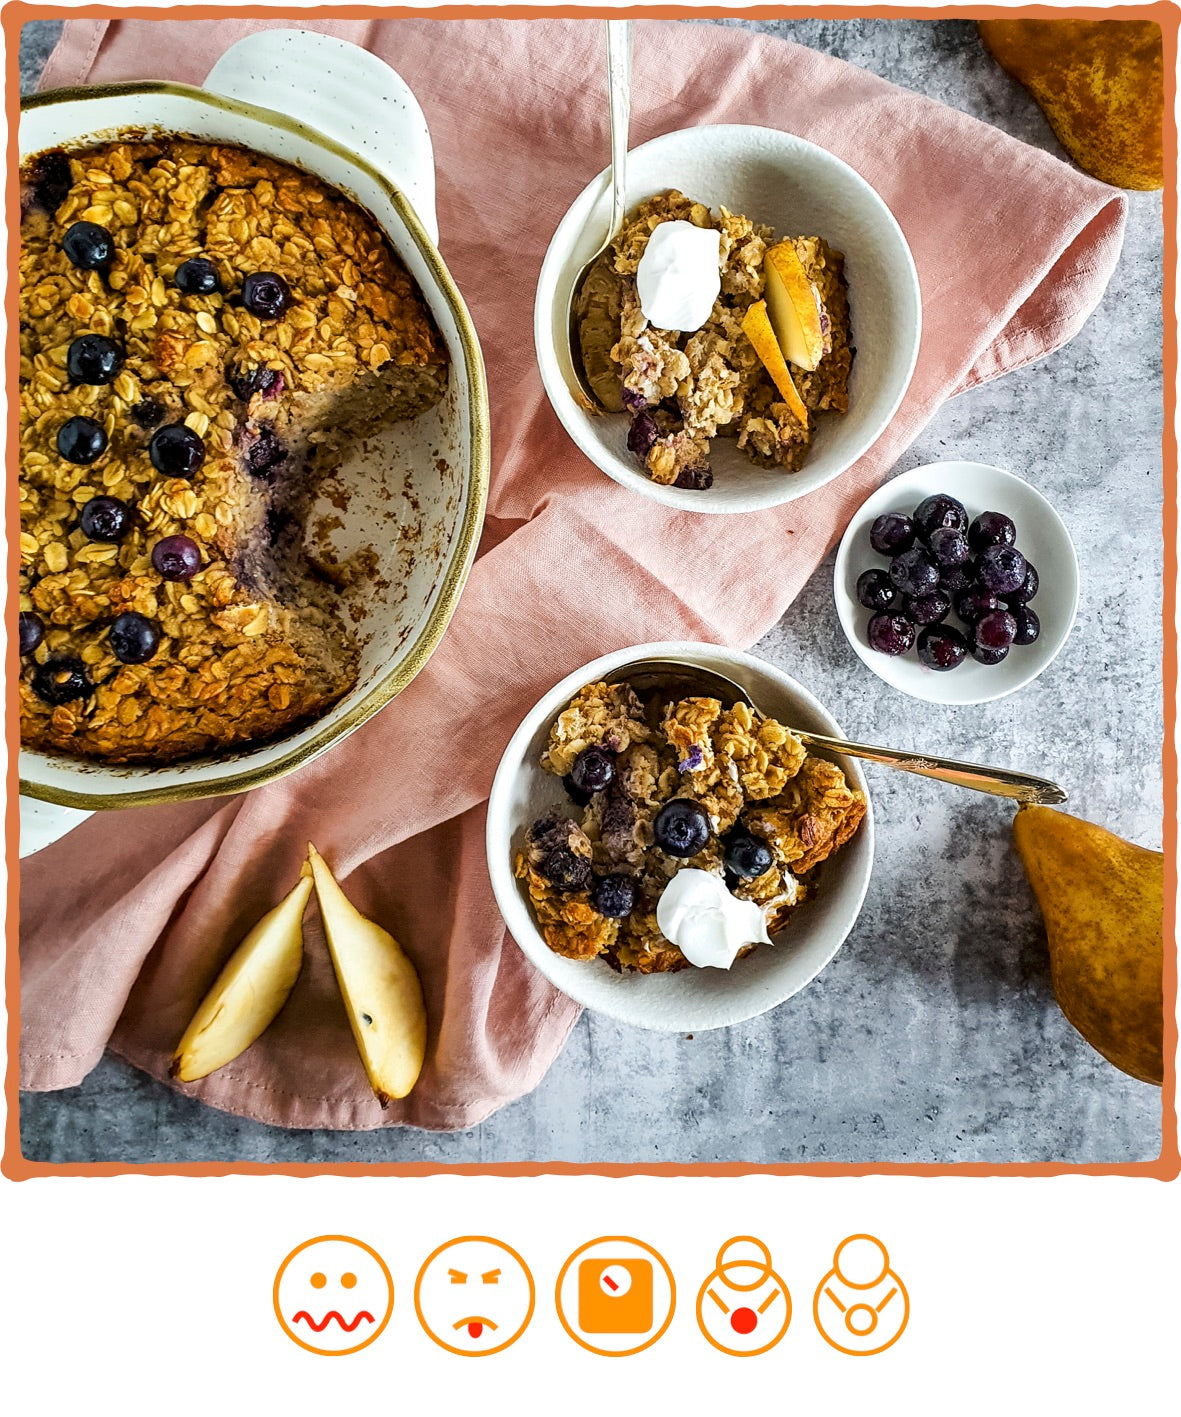 Pear & Blueberry Baked Oatmeal